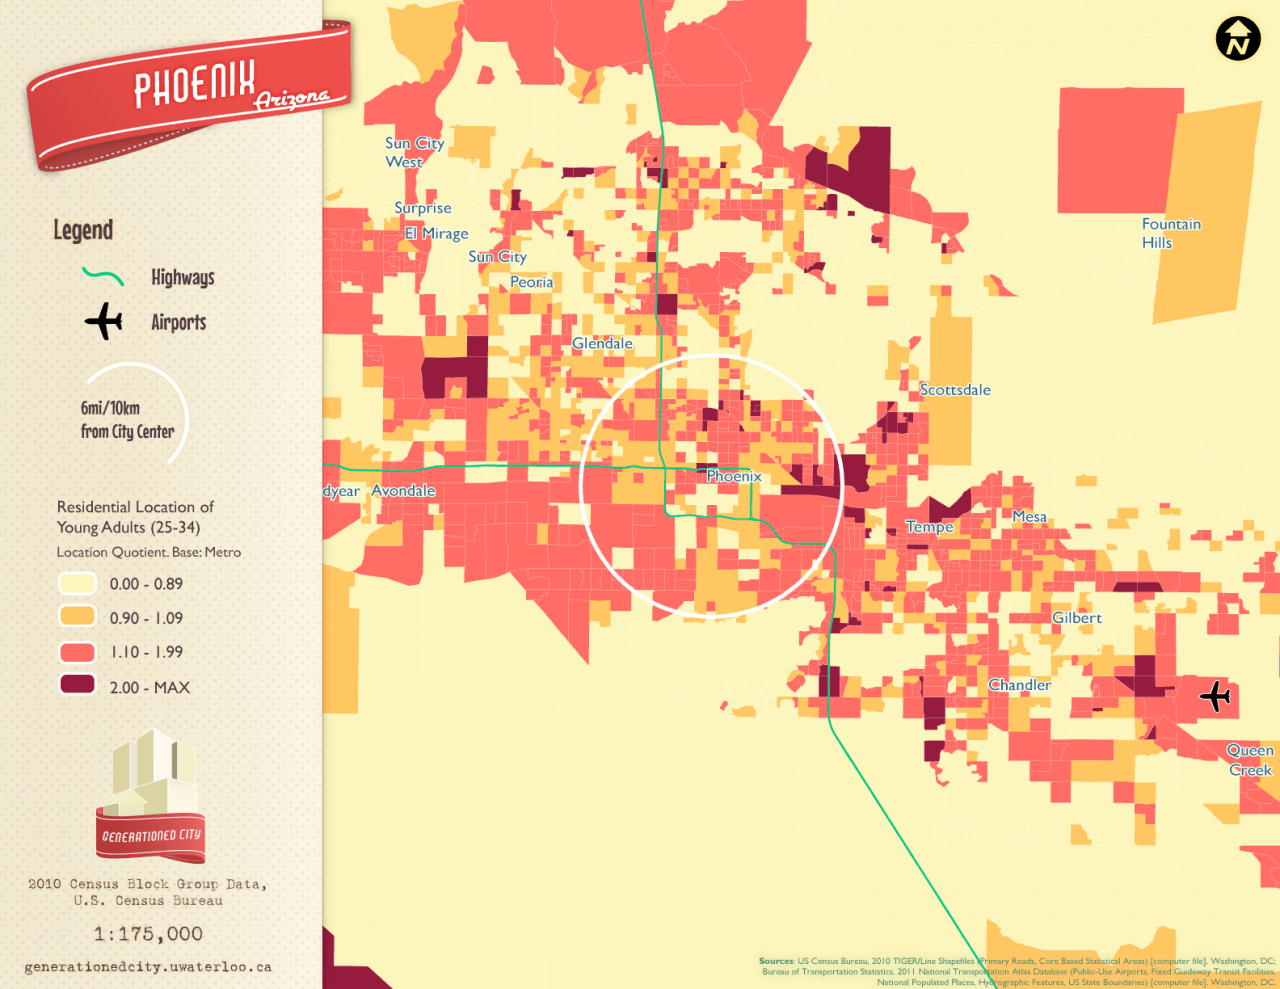 Residential location of young adults in Phoenix.